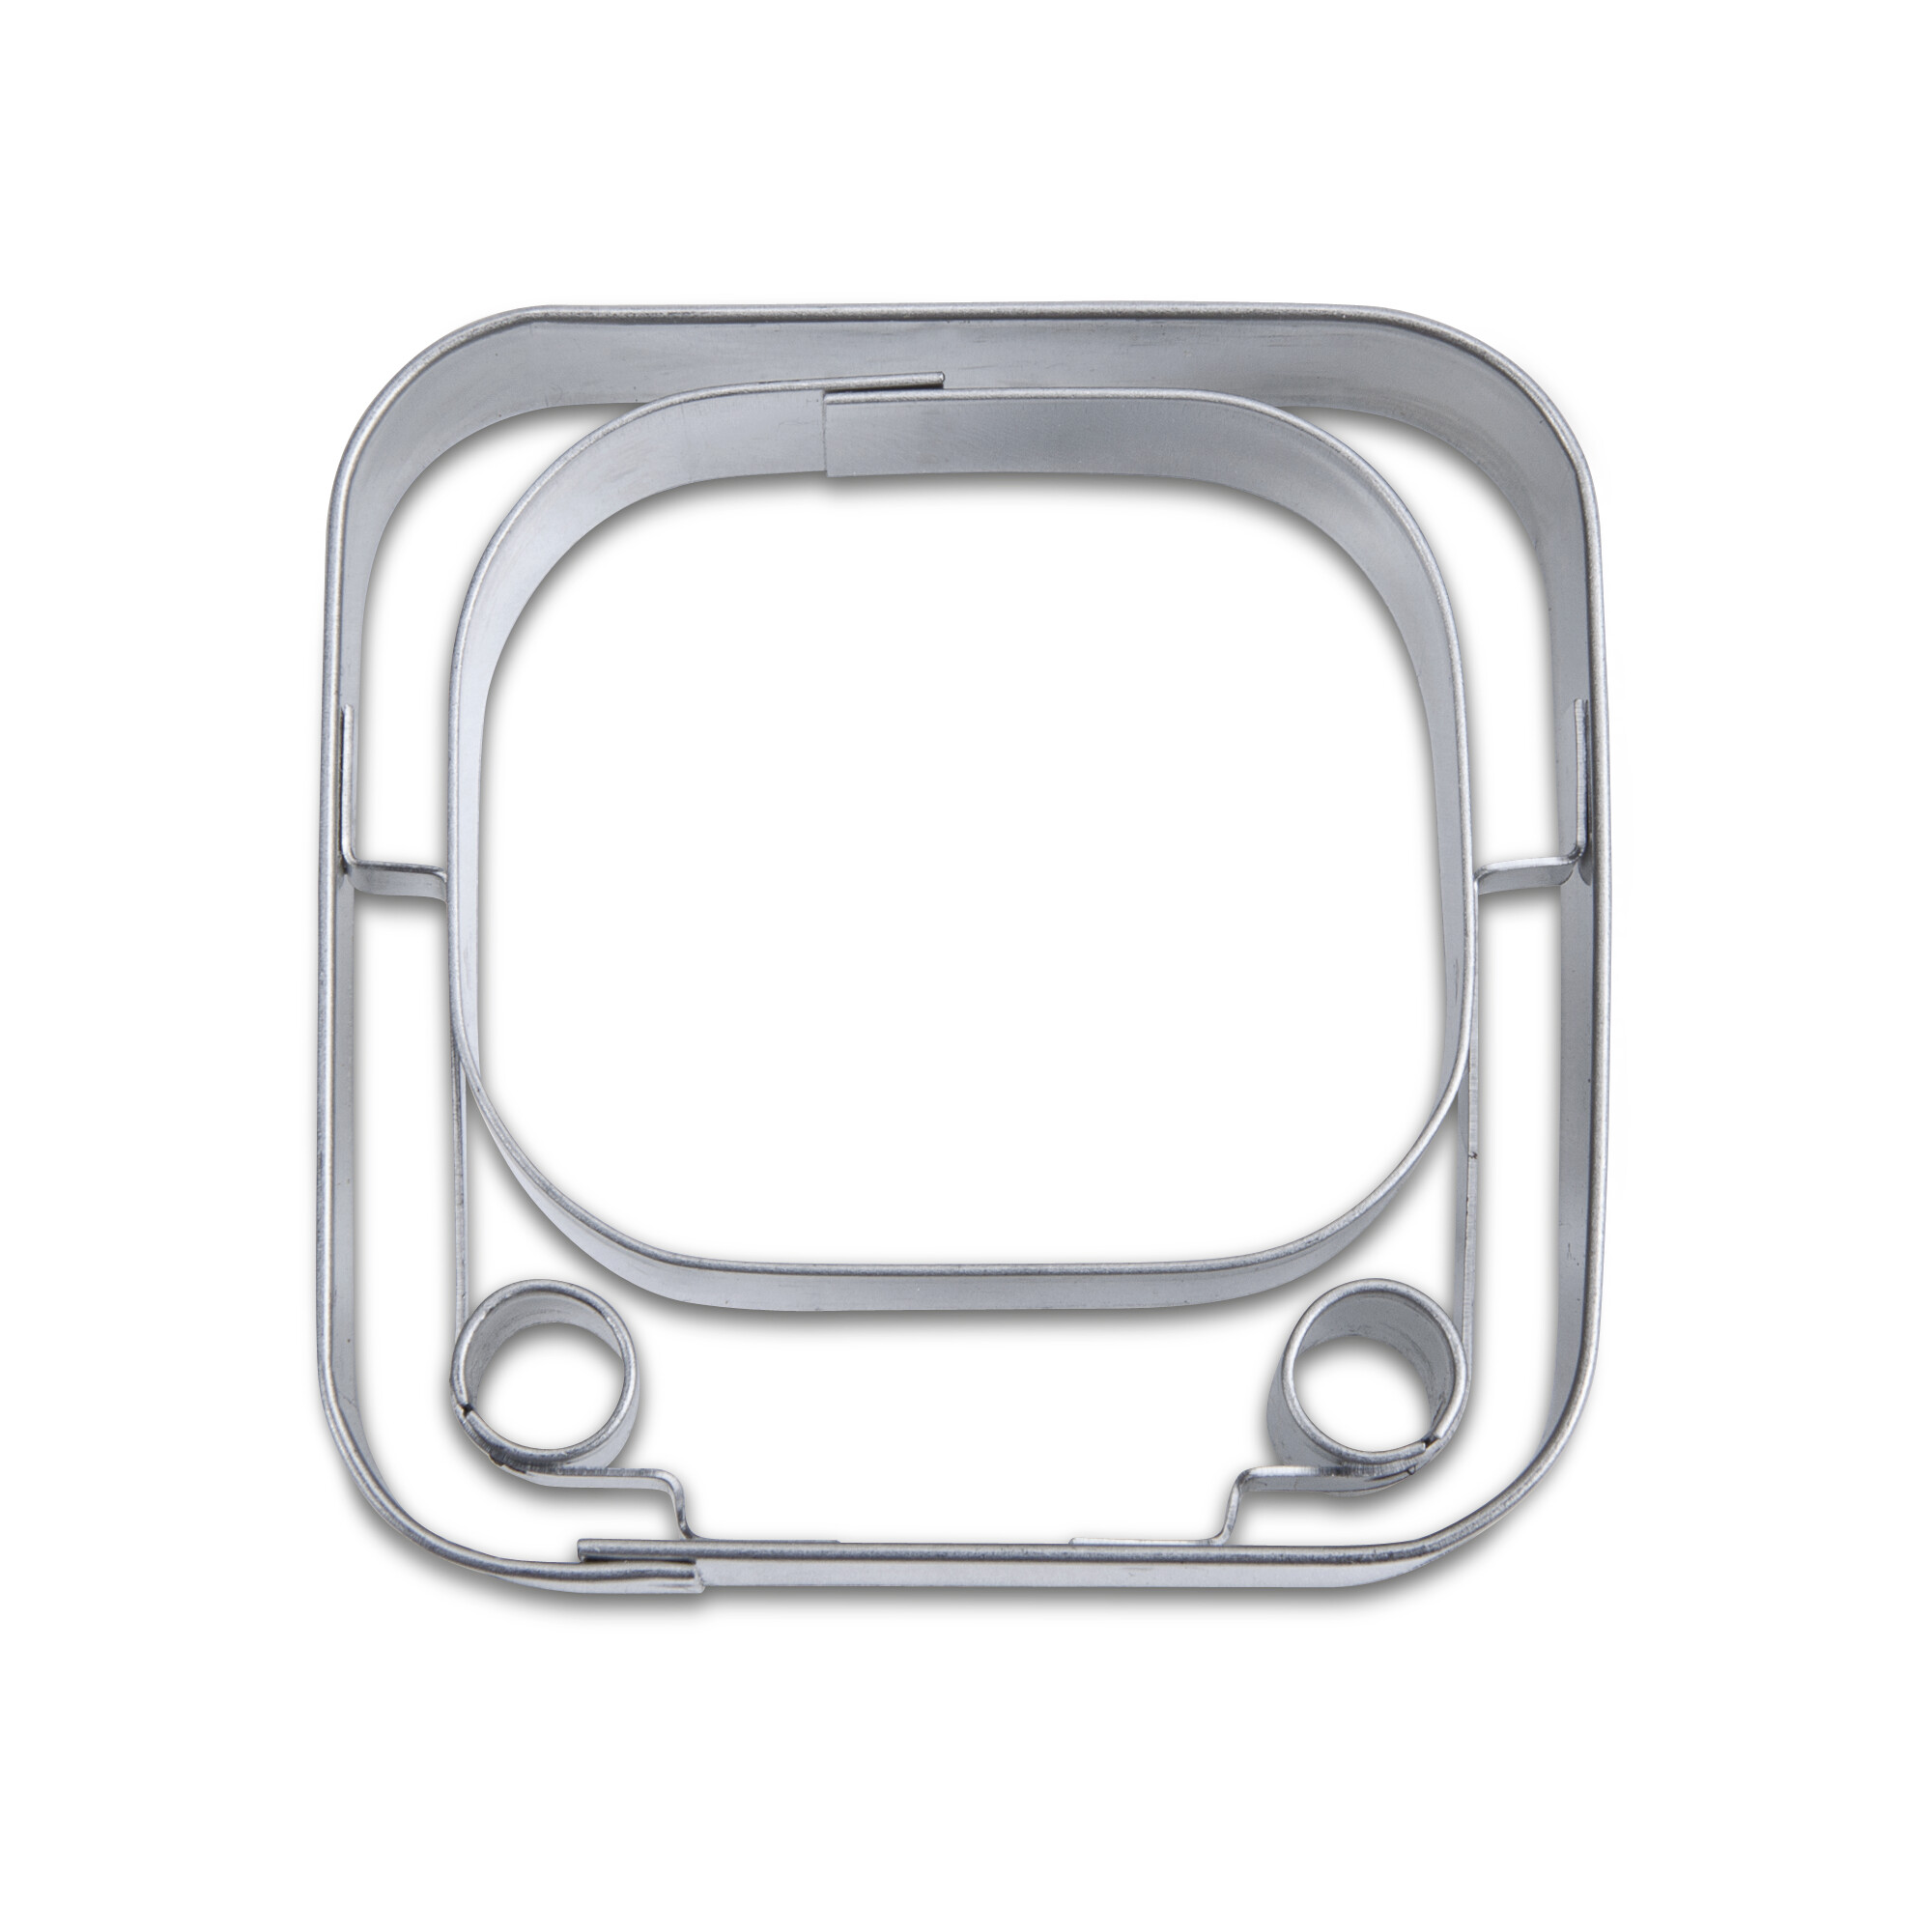 Cookie cutter with stamp – App-Cutter Y tube